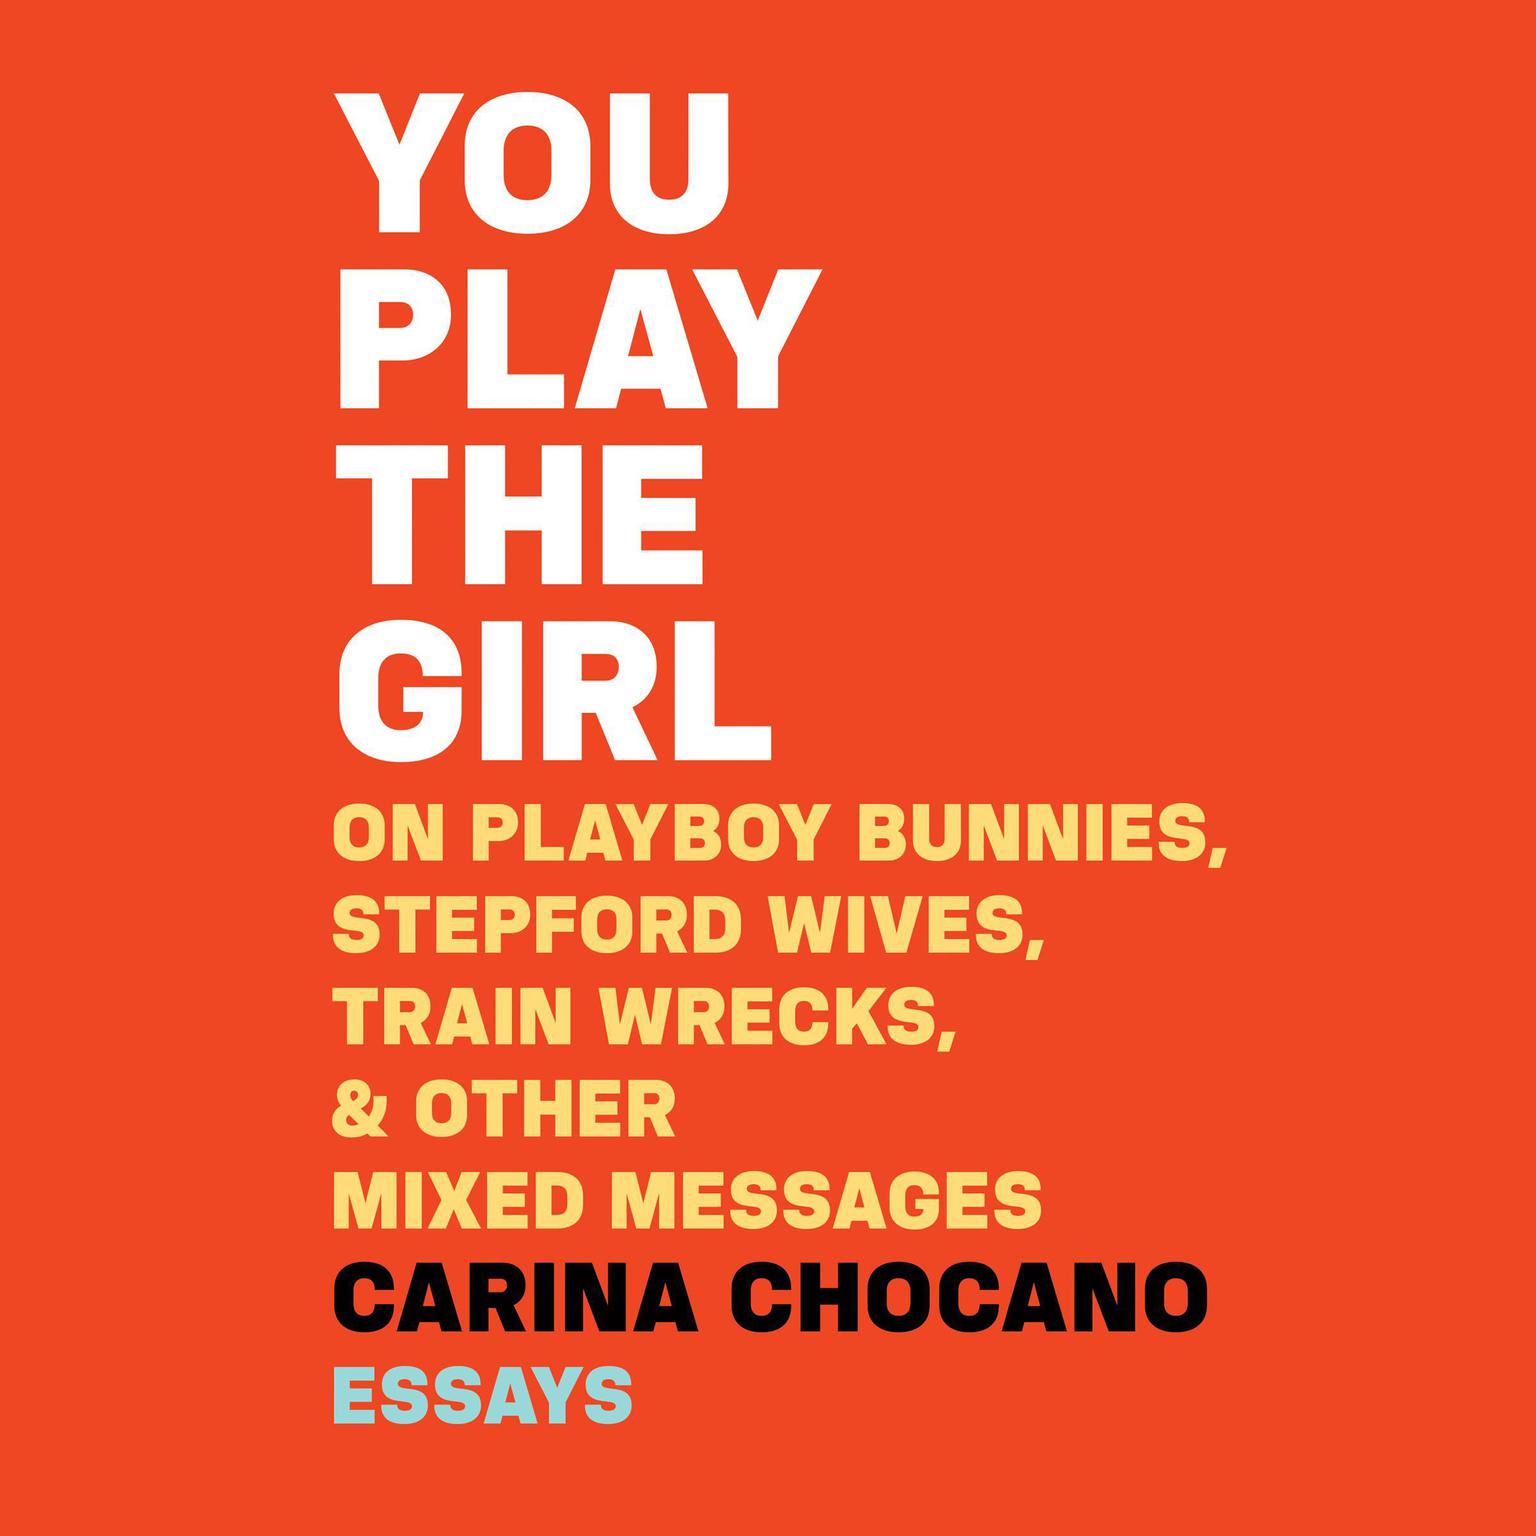 You Play the Girl: On Playboy Bunnies, Stepford Wives, Train Wrecks, & Other Mixed Messages Audiobook, by Carina Chocano